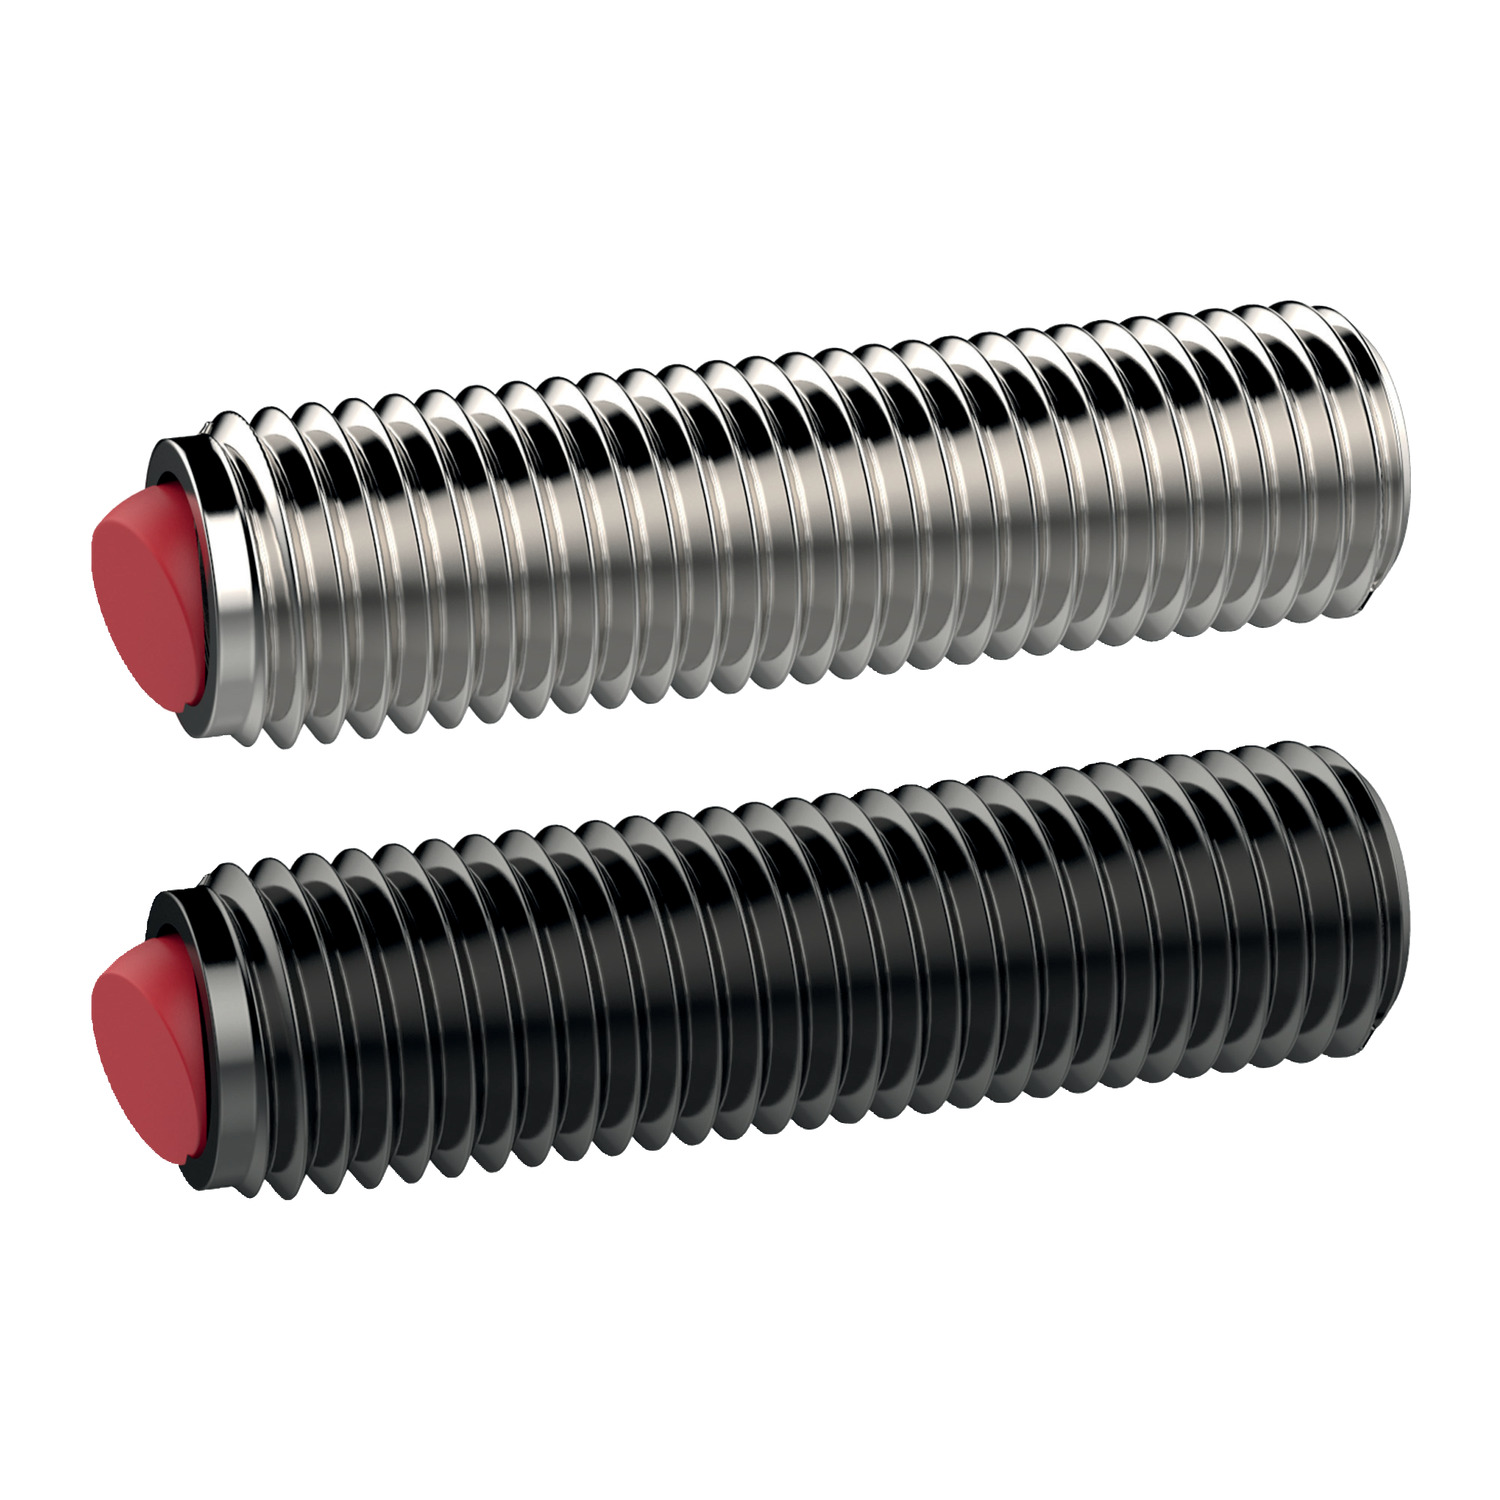 Thrust Screws - Ball Ended Ball ended thrust screws with thermoplastic balls are used for brittle, pressure sensitive parts. Main housing is available in steel or stainless steel.